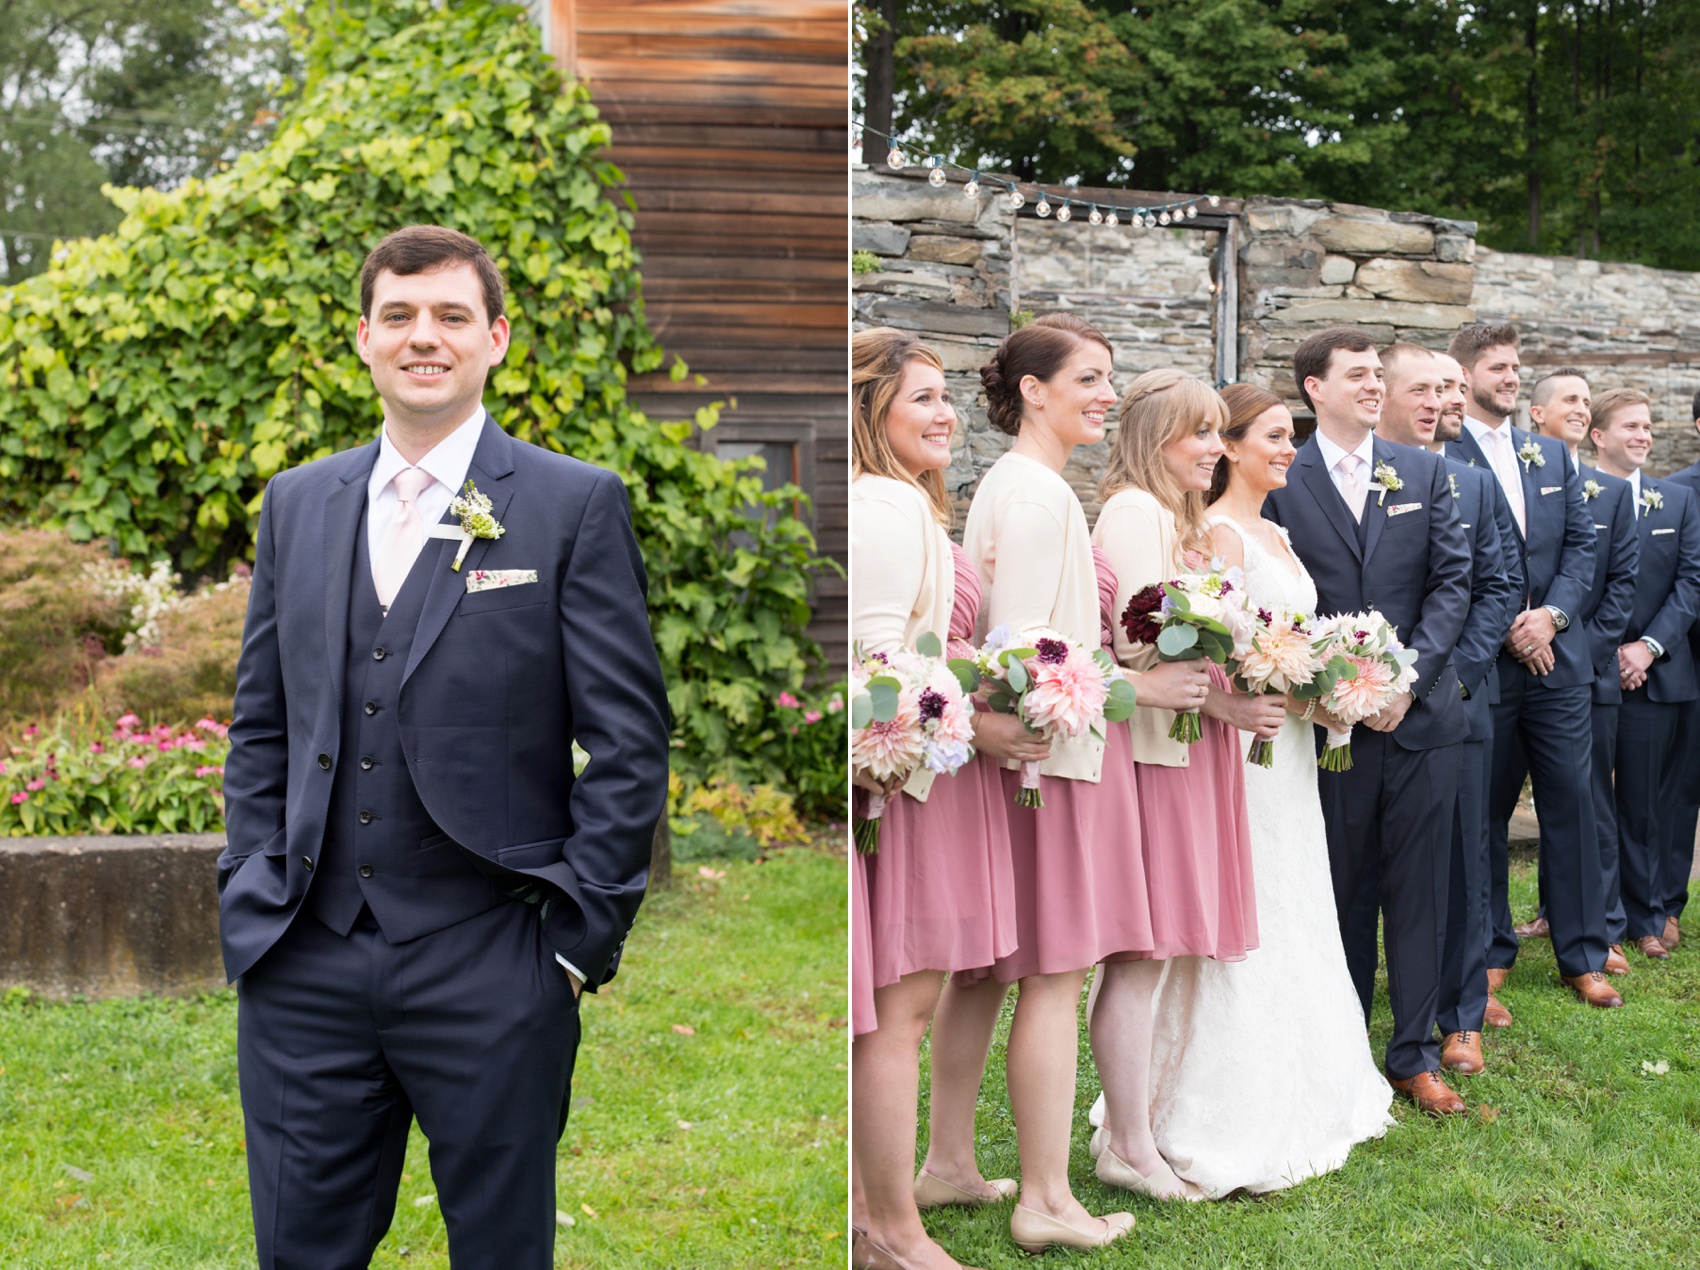 A Red Maple Vineyard wedding party with the bridal party in dusty rose dresses and groomsmen in navy. Photo by NYC wedding photographer Mikkel Paige Photography.